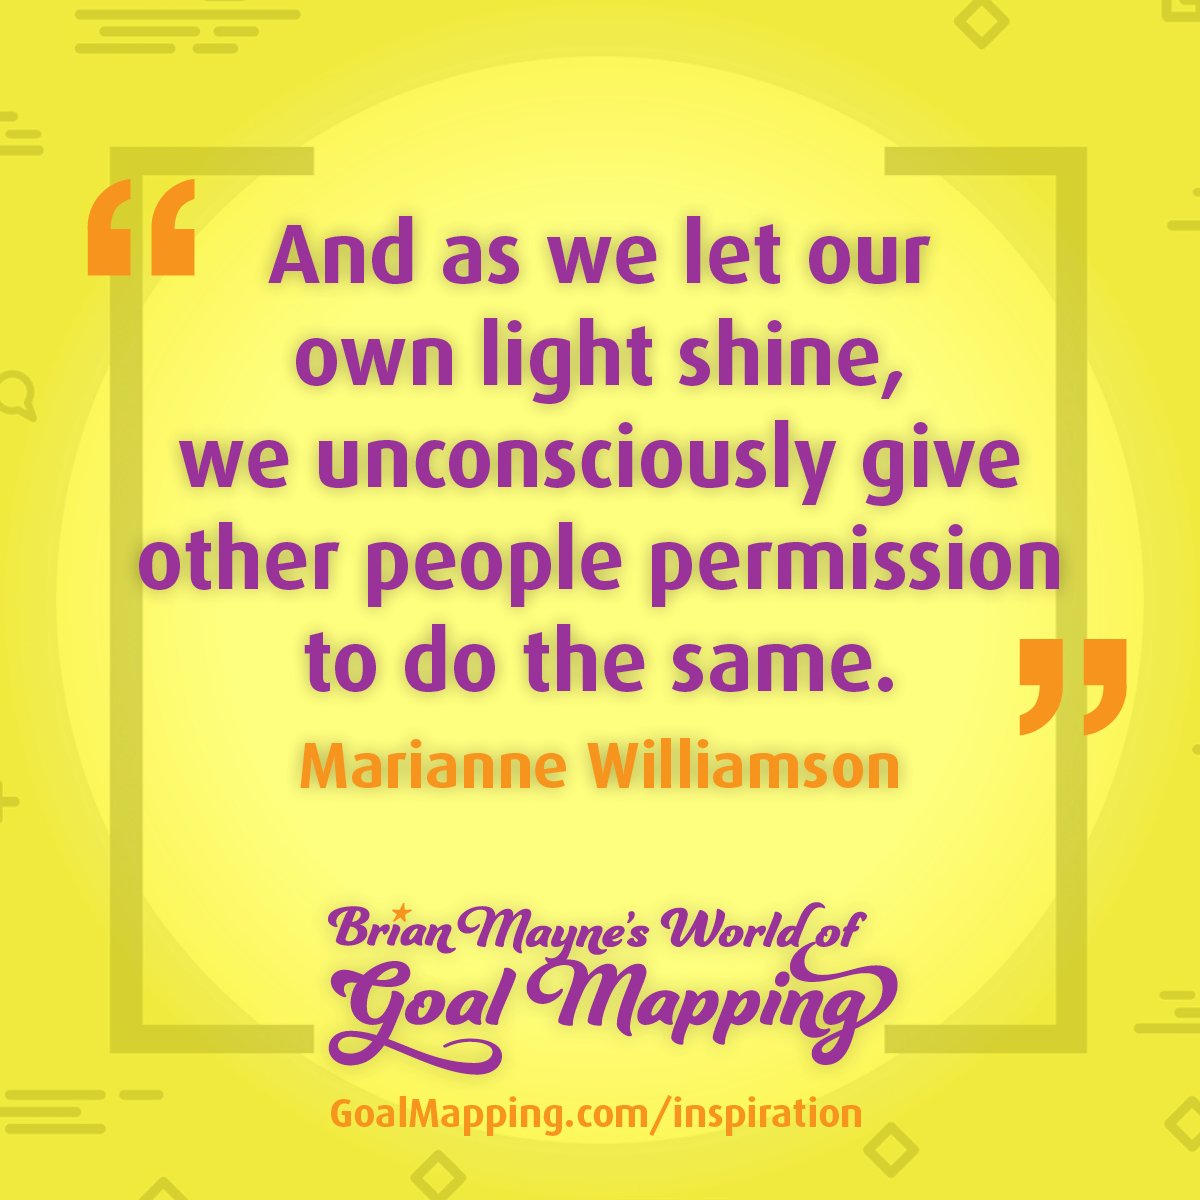 "And as we let our own light shine, we unconsciously give other people permission to do the same." Marianne Williamson